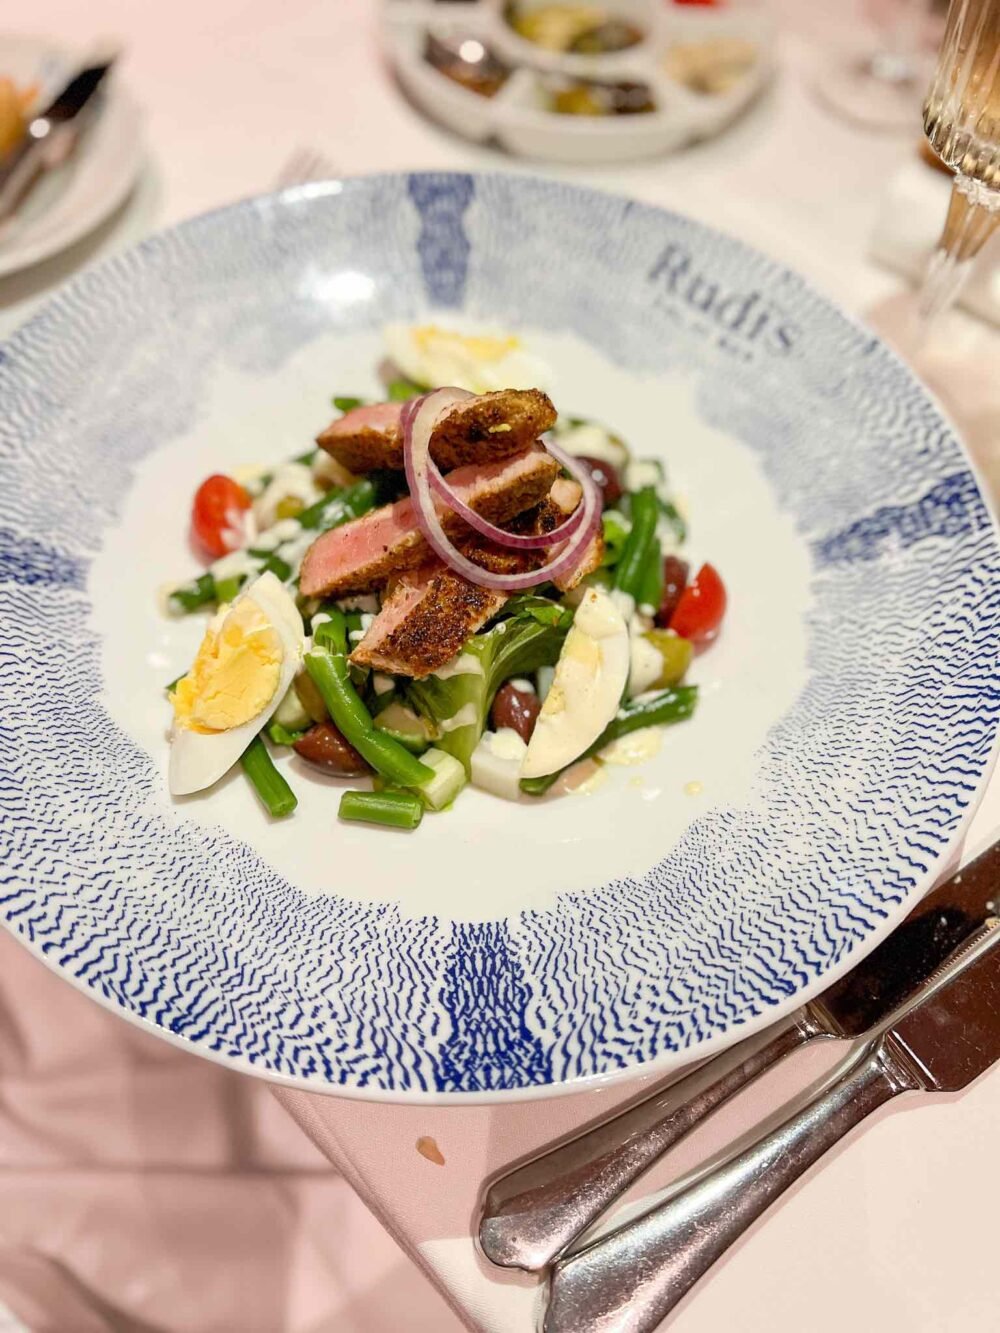 Salad Nicoise at Rudi's French Seafood Brasserie